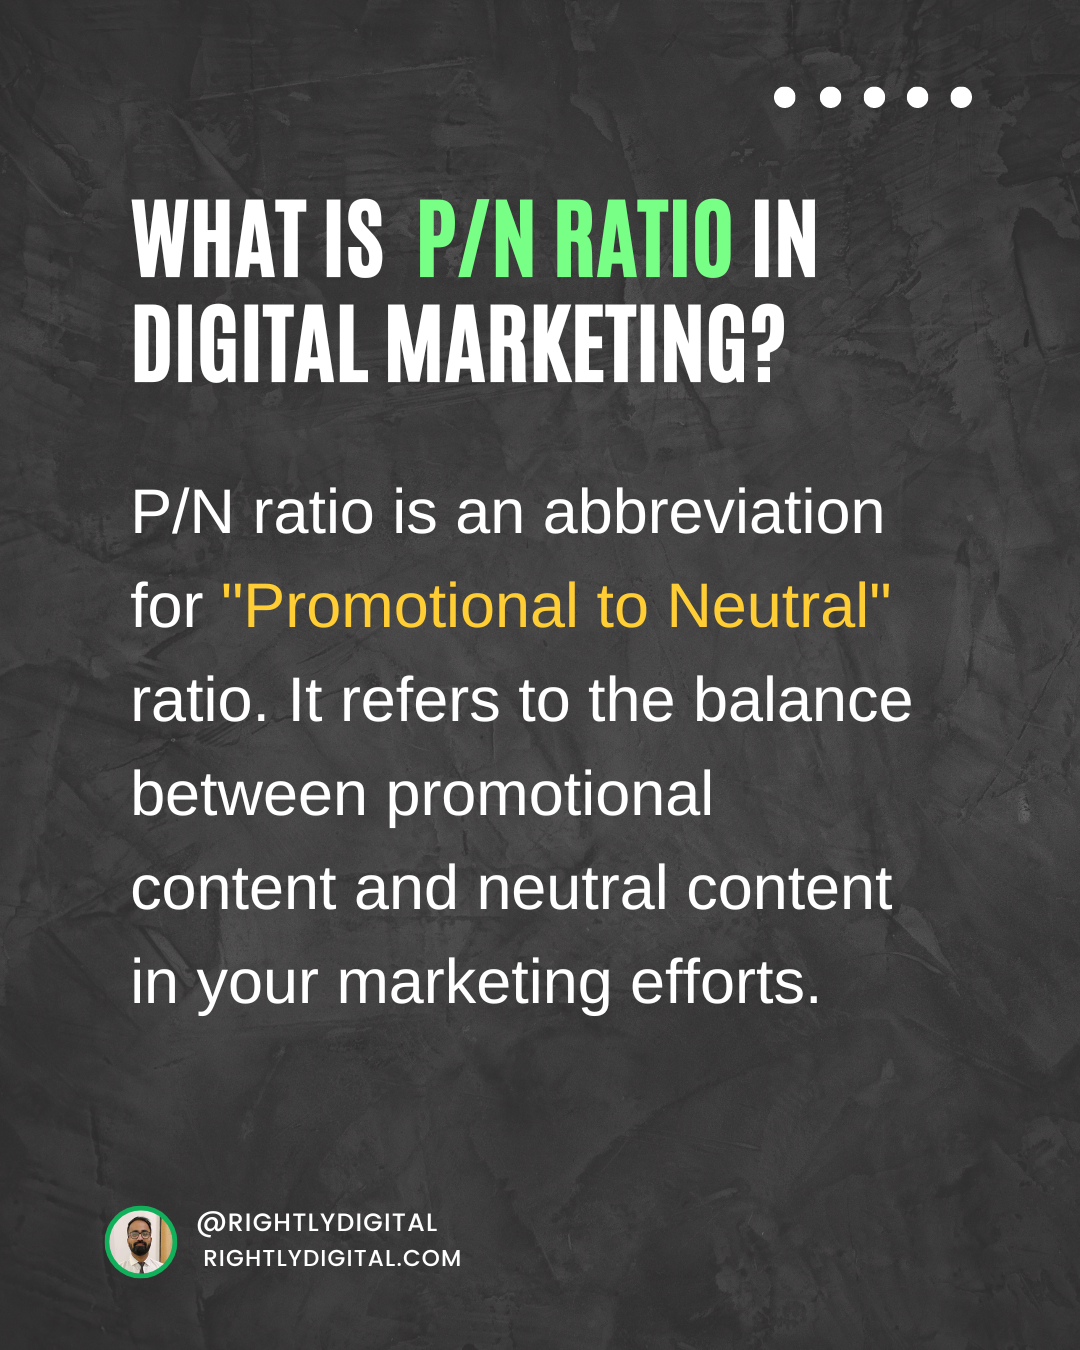 P/N ratio is an abbreviation for "Promotional to Neutral" ratio. It refers to the balance between promotional content and neutral content in your marketing efforts. 